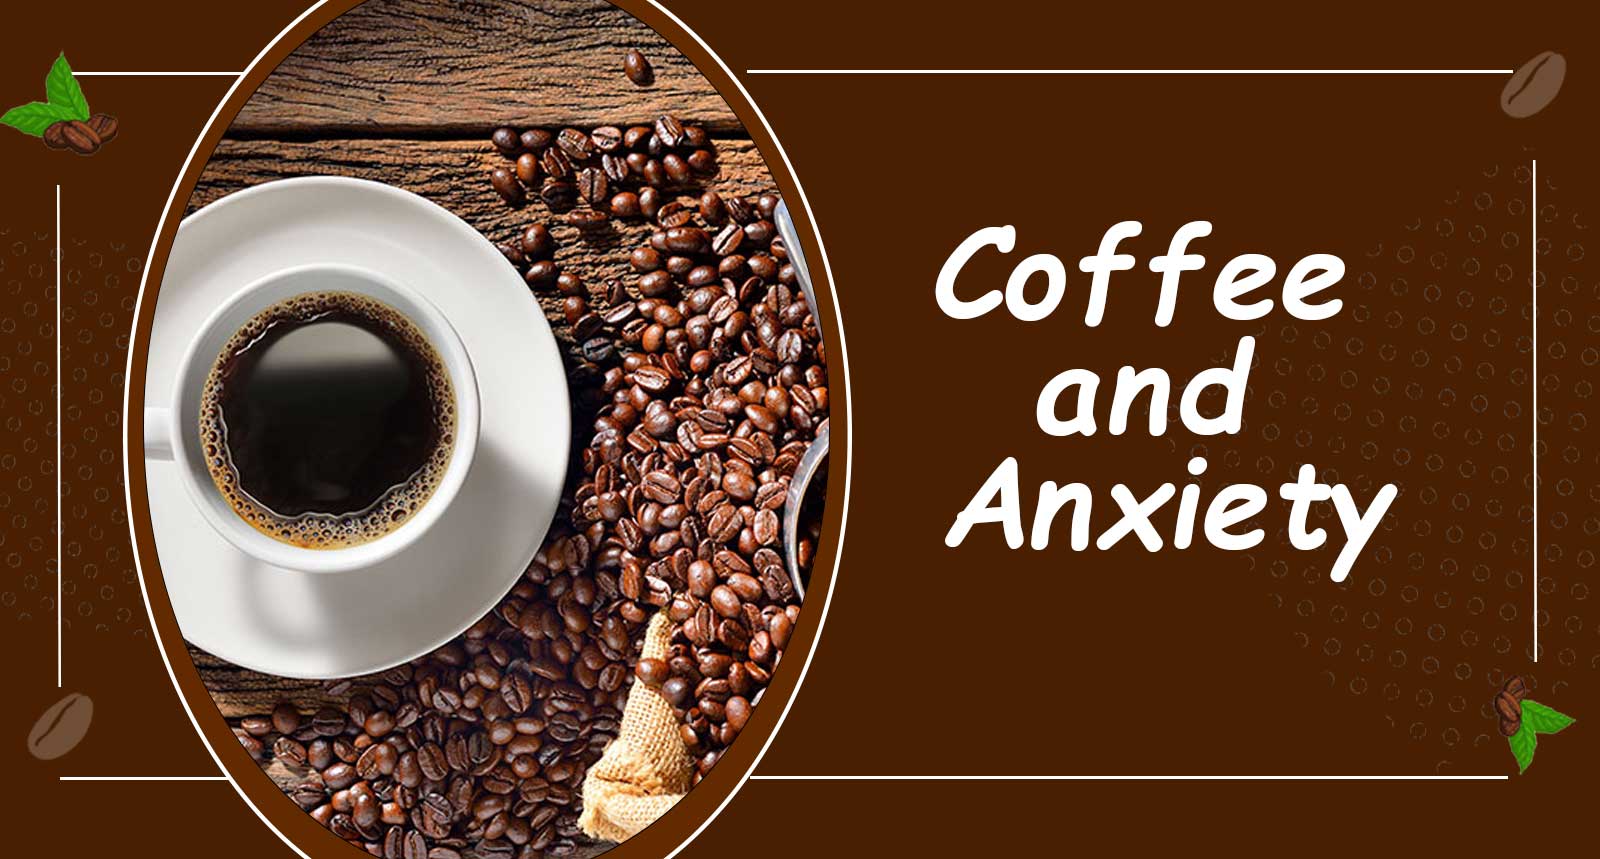 Coffee and anxiety